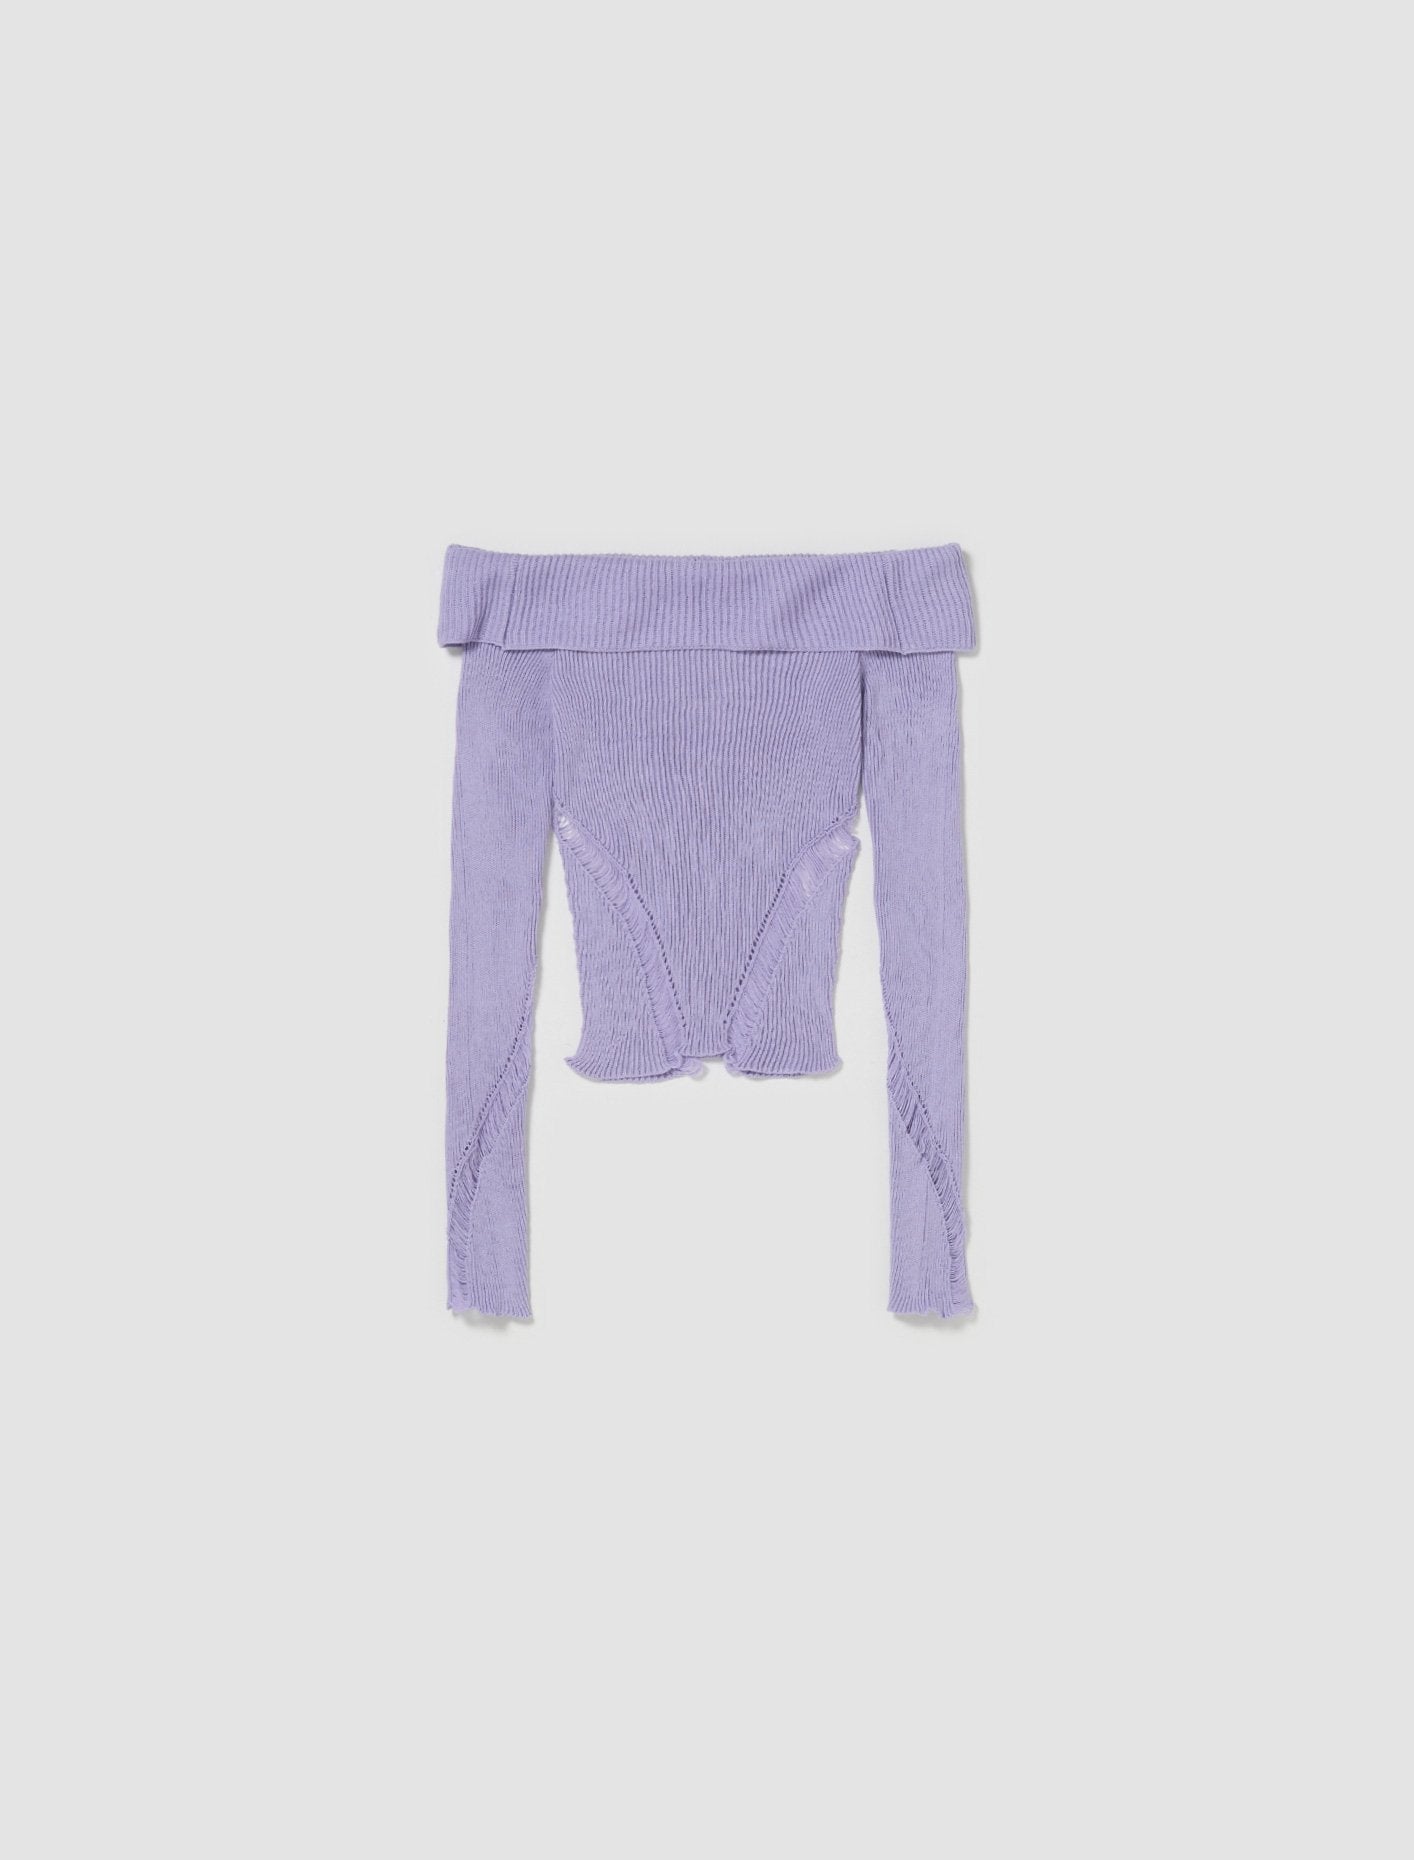 Floater Top in Lilac